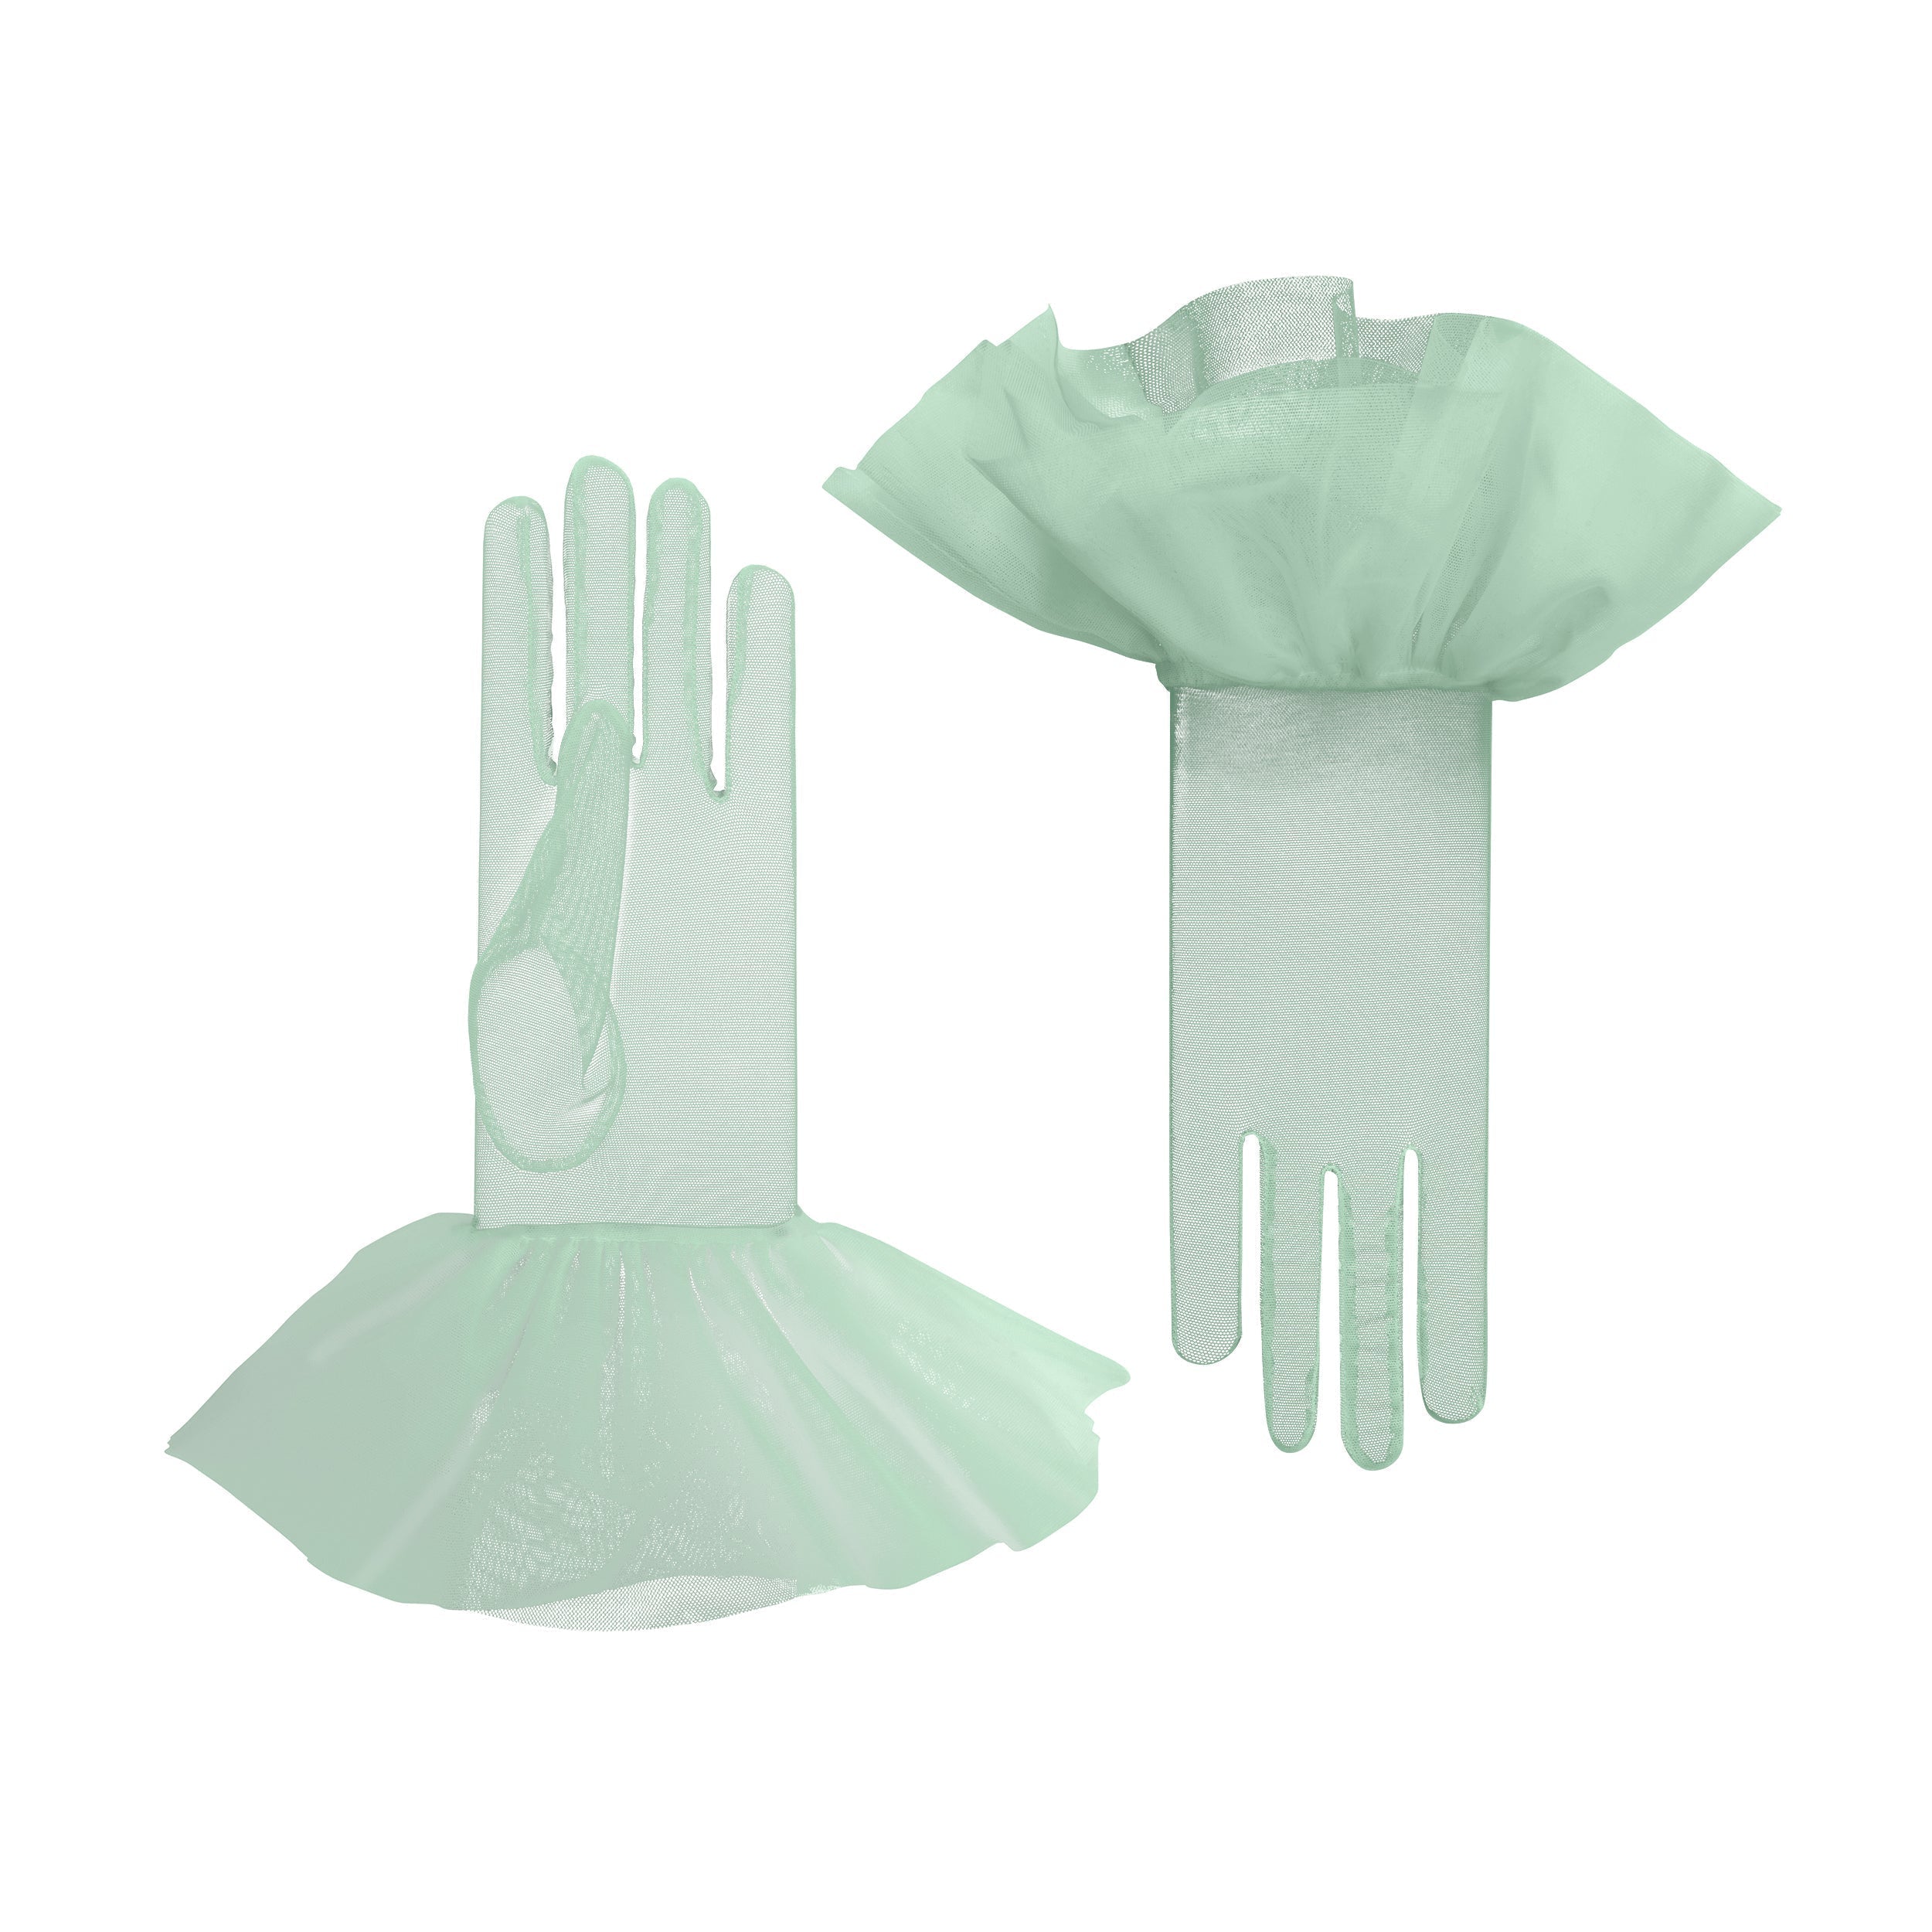 Cornelia James - Green Tulle Gloves with Harlequin Cuff - Lara - Size Large (8½) - Handmade Tulle Gloves by Cornelia James product